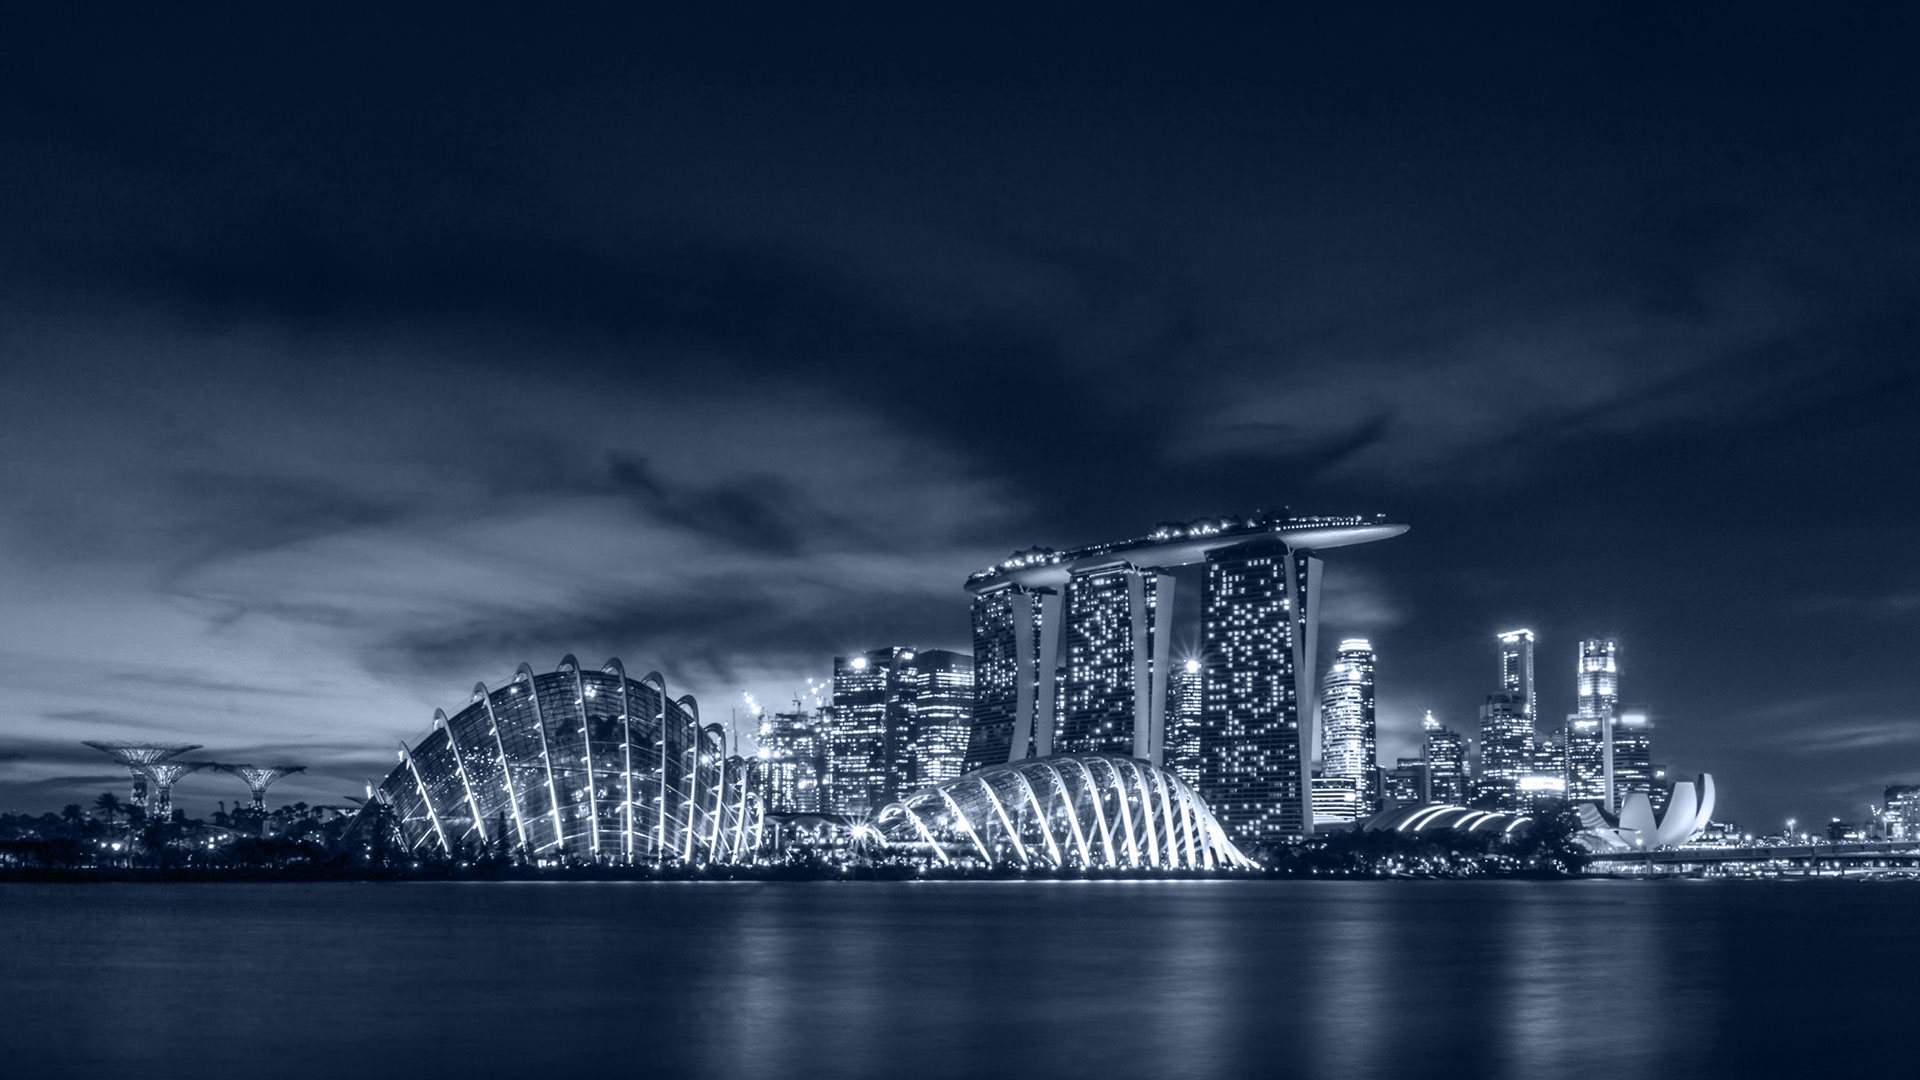 compliance/aml news roundup – Singapore Grants First Regulatory In-Principle Approval to Crypto Exchange